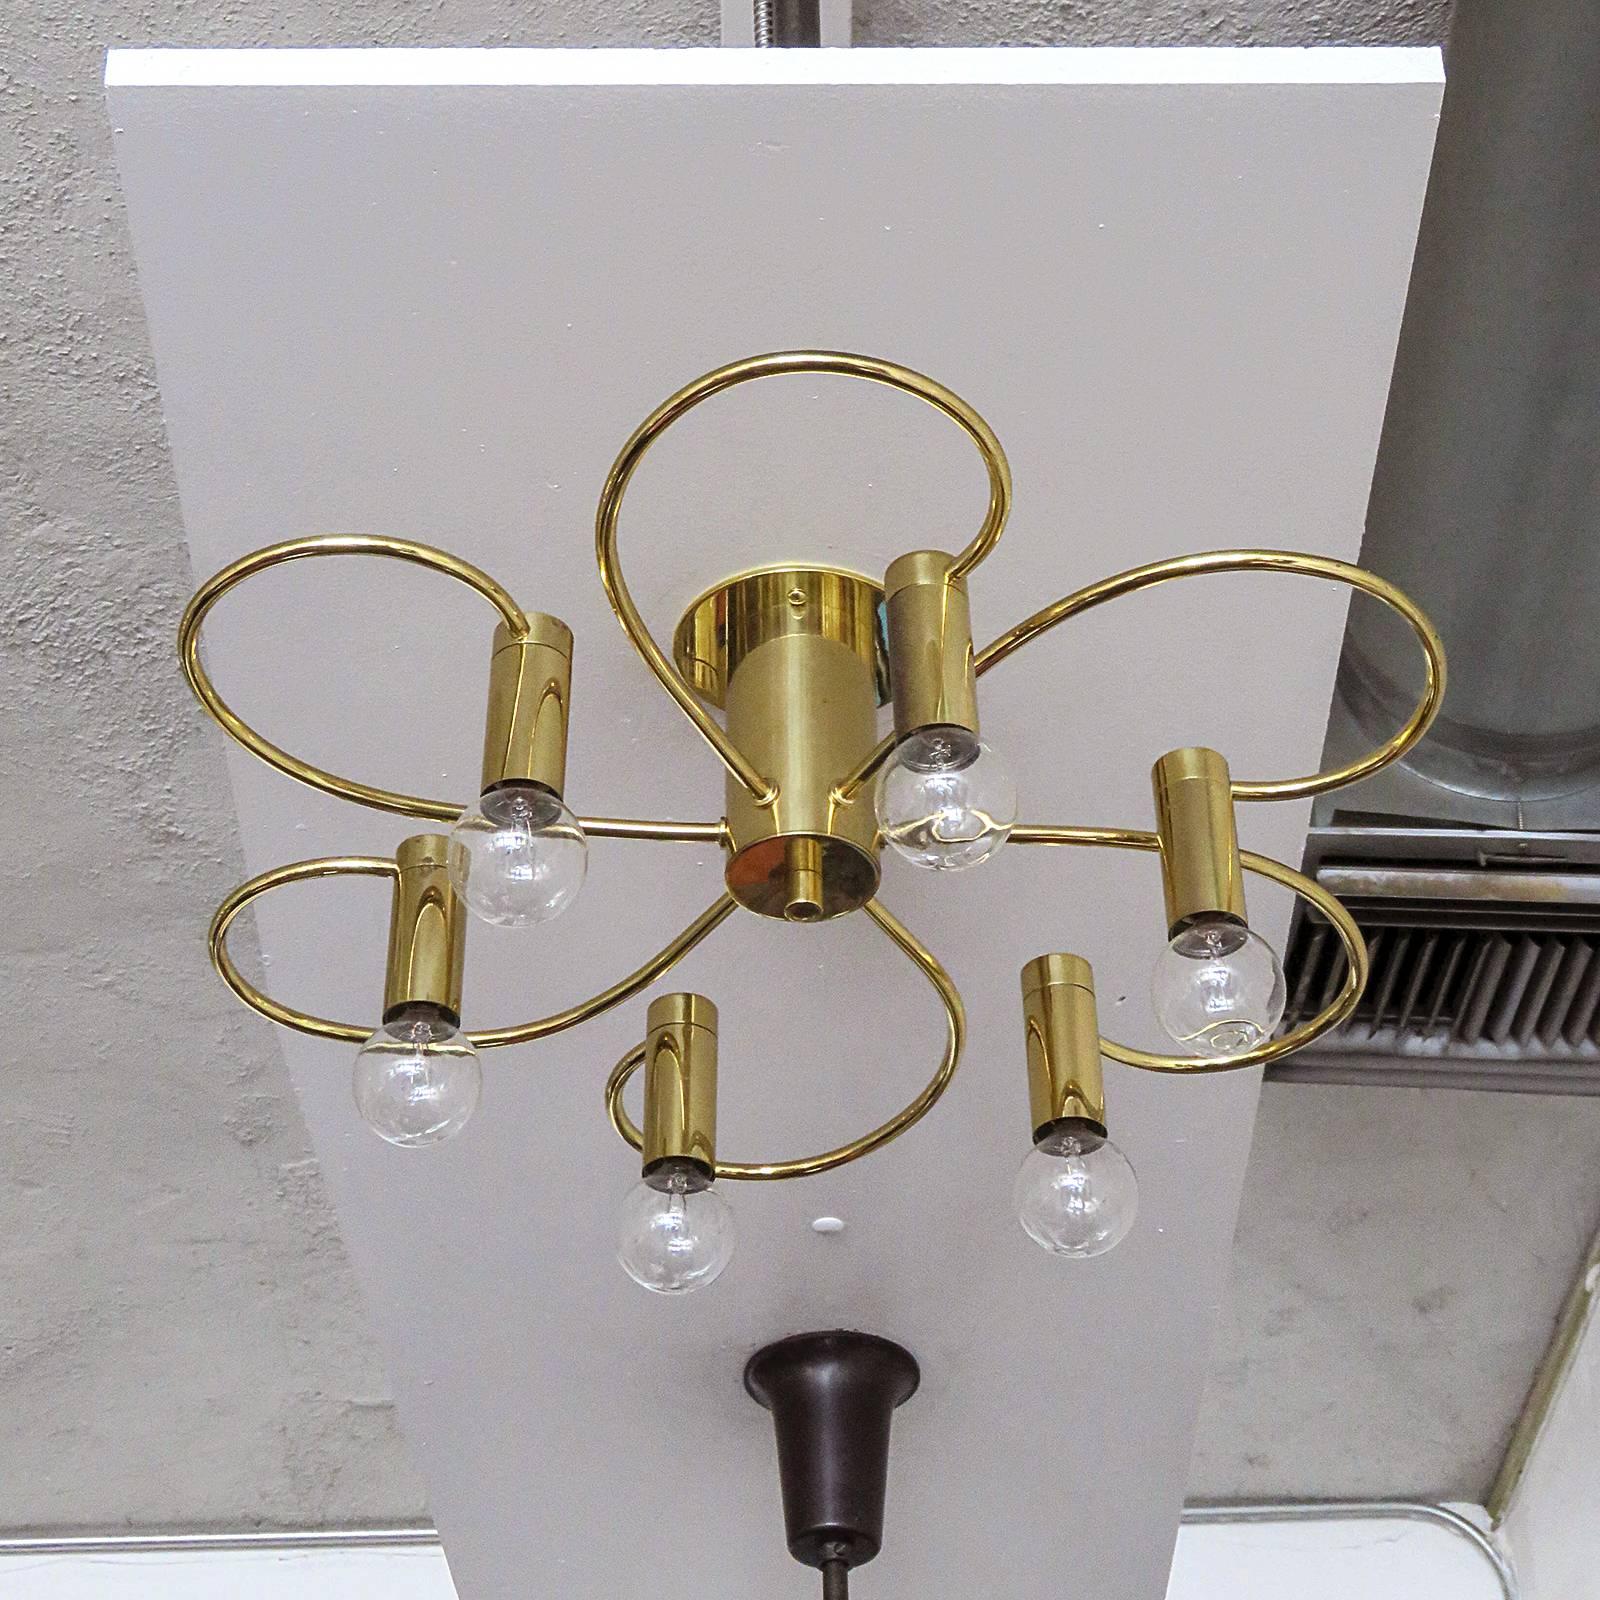 sculptural brass light flush mount ceiling light by Honsel Germany with six organically shaped arms, can be used as wall sconce